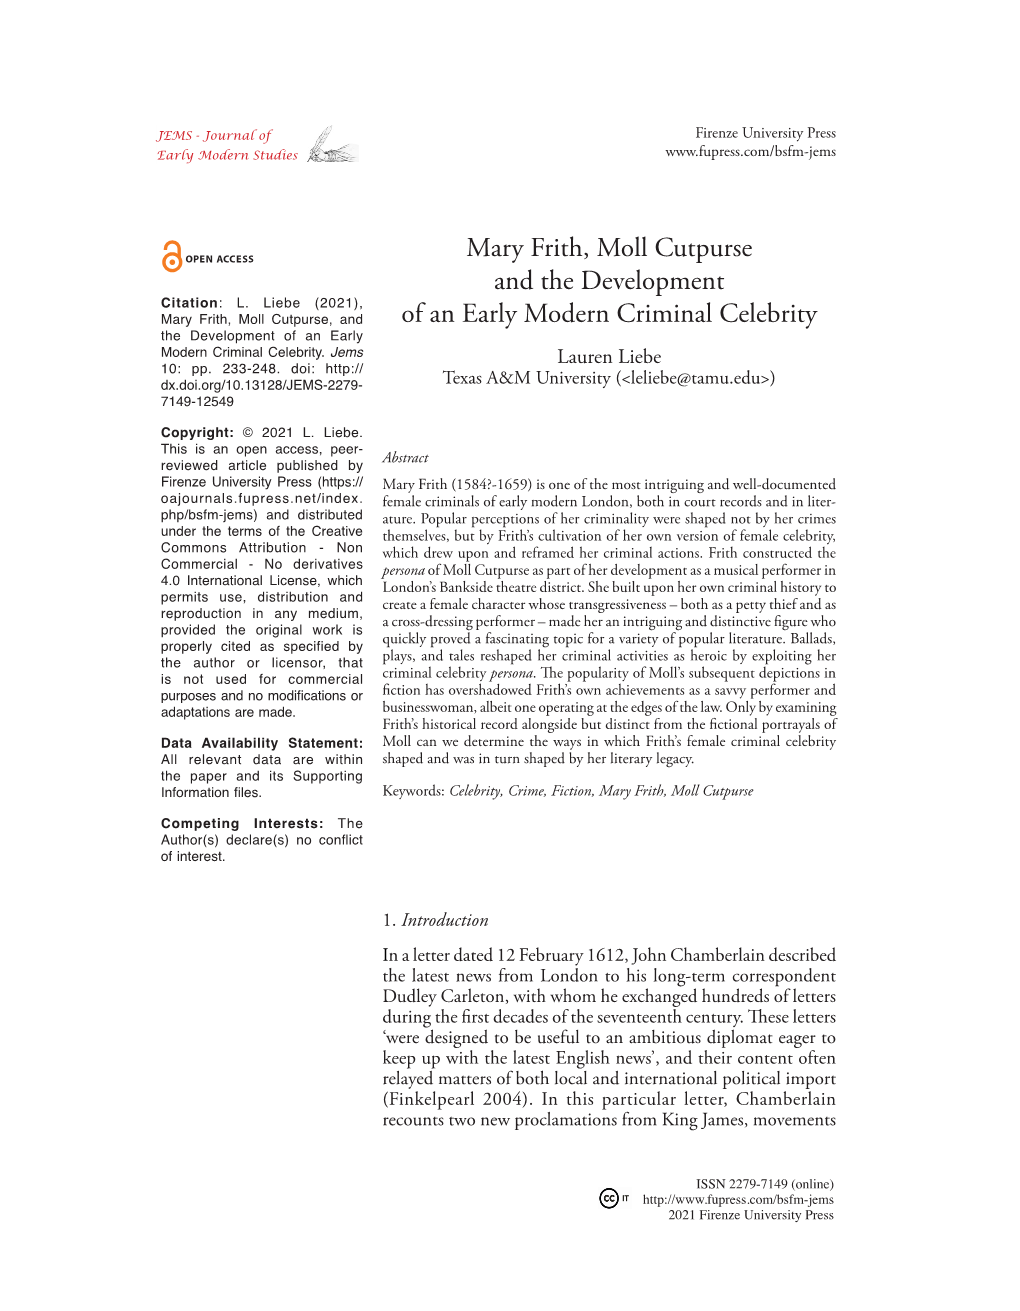 Mary Frith, Moll Cutpurse and the Development of an Early Modern